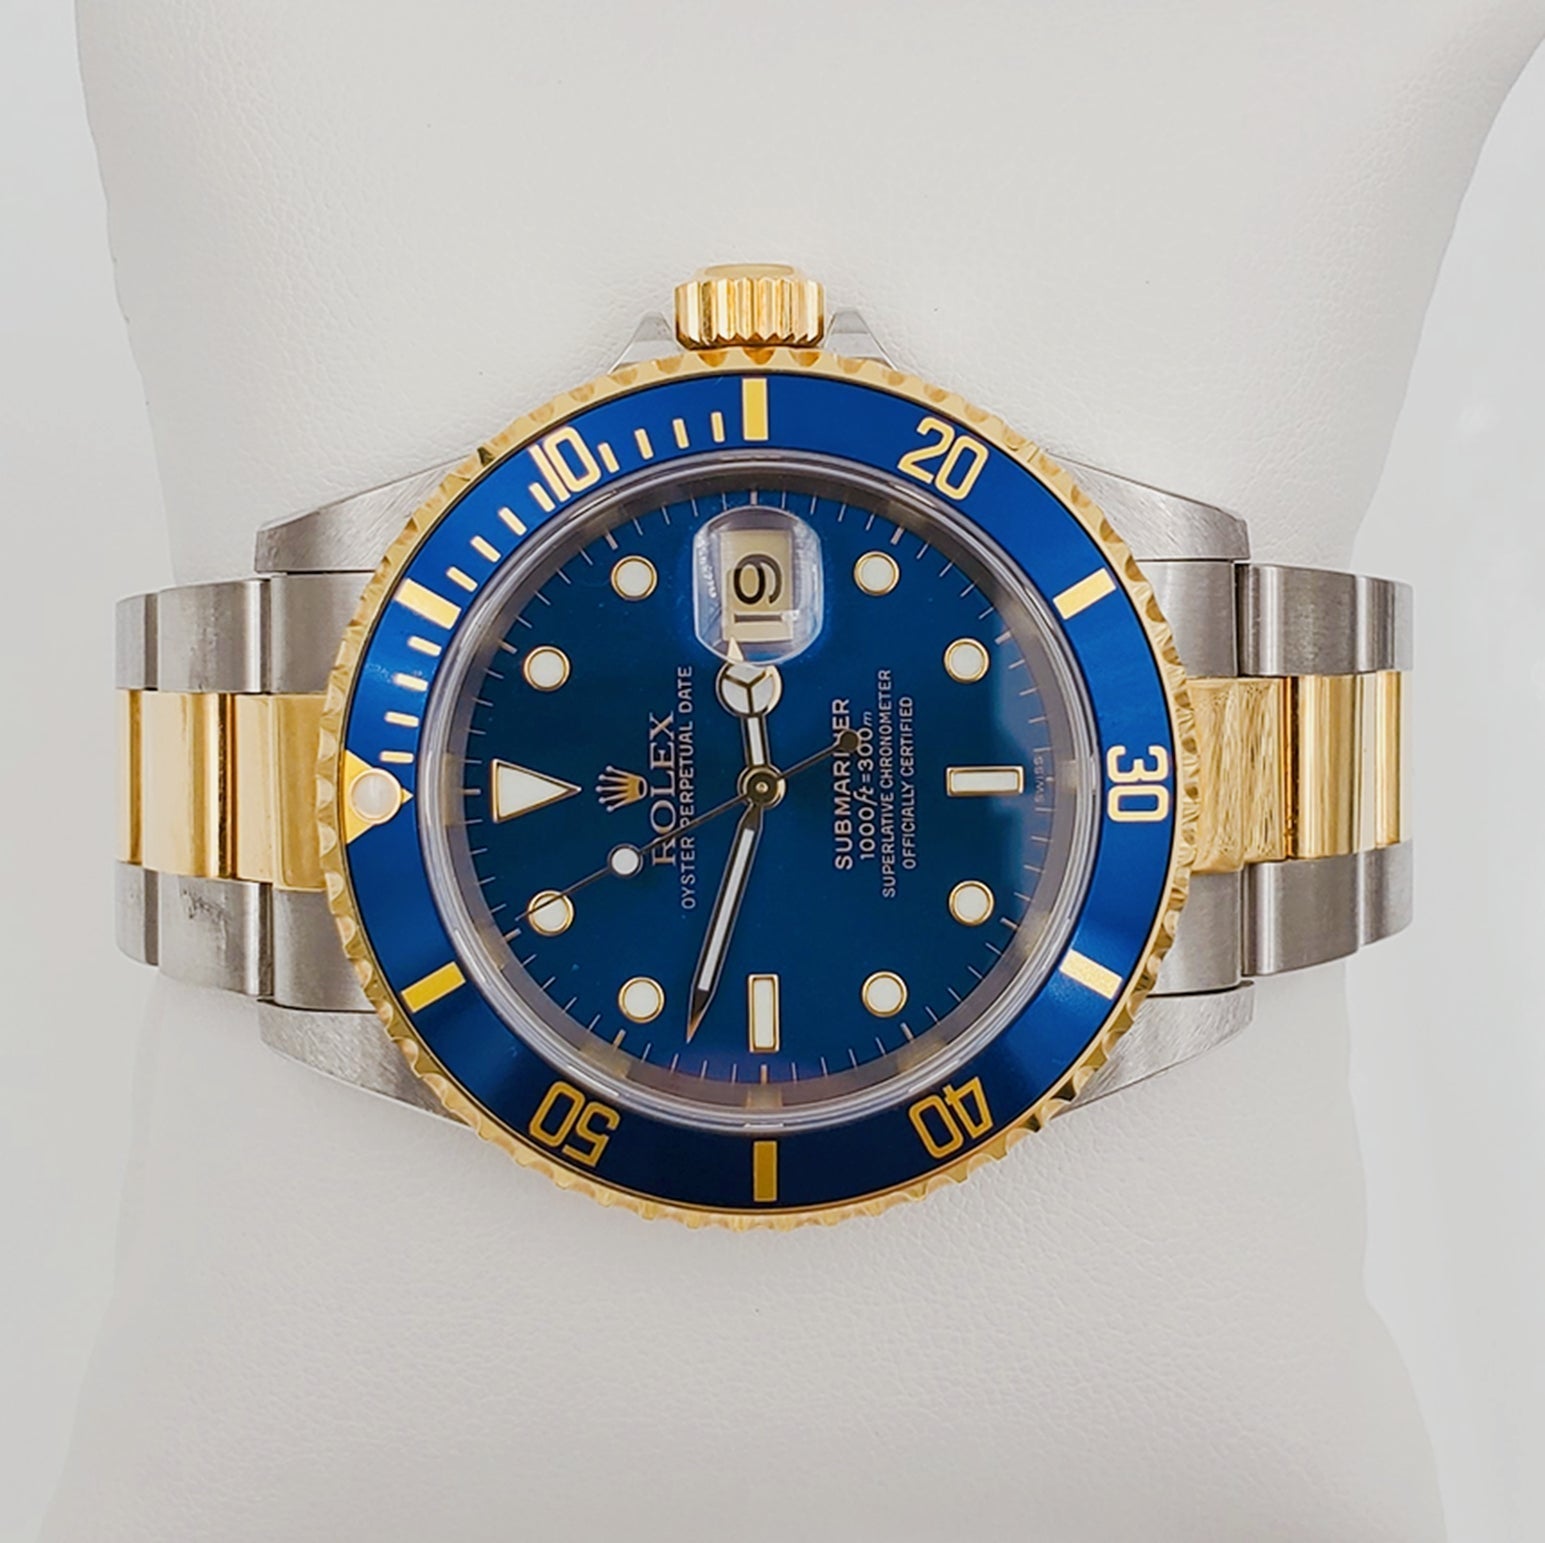 2004 Men's Rolex 40mm Submariner Oyster Perpetual Two Tone 18K Yellow Gold / Stainless Steel Watch with Blue Dial and Blue Bezel. (Pre-Owned 16613)